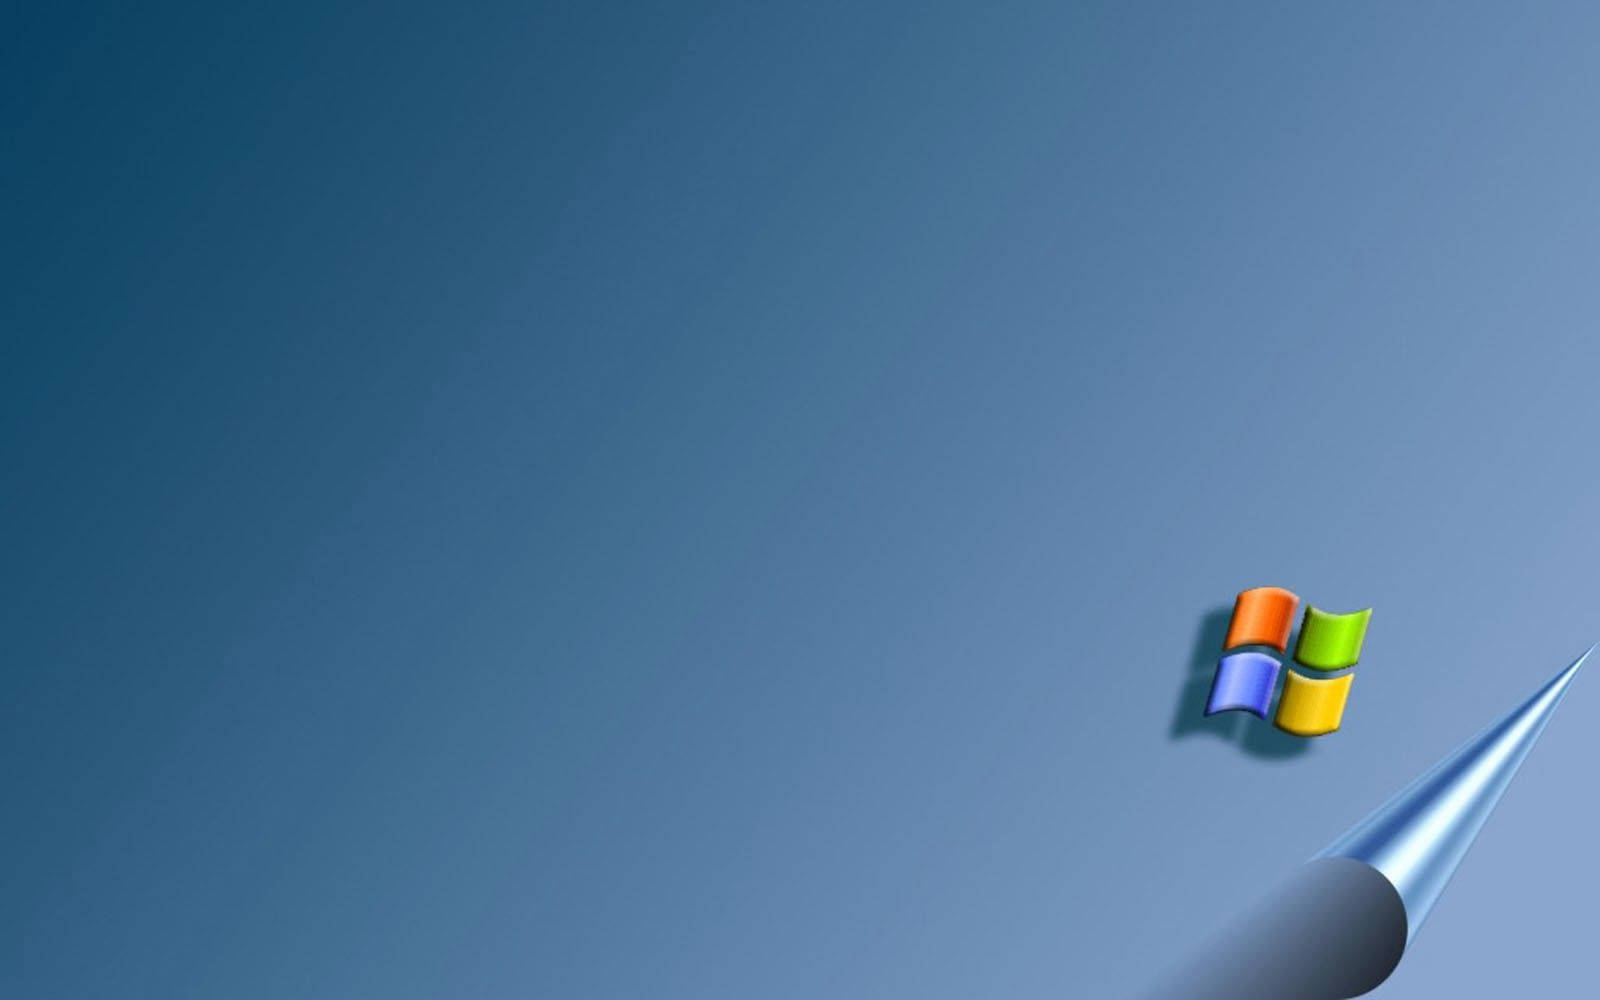 Glossy Blue Turning Page Microsoft Wallpaper